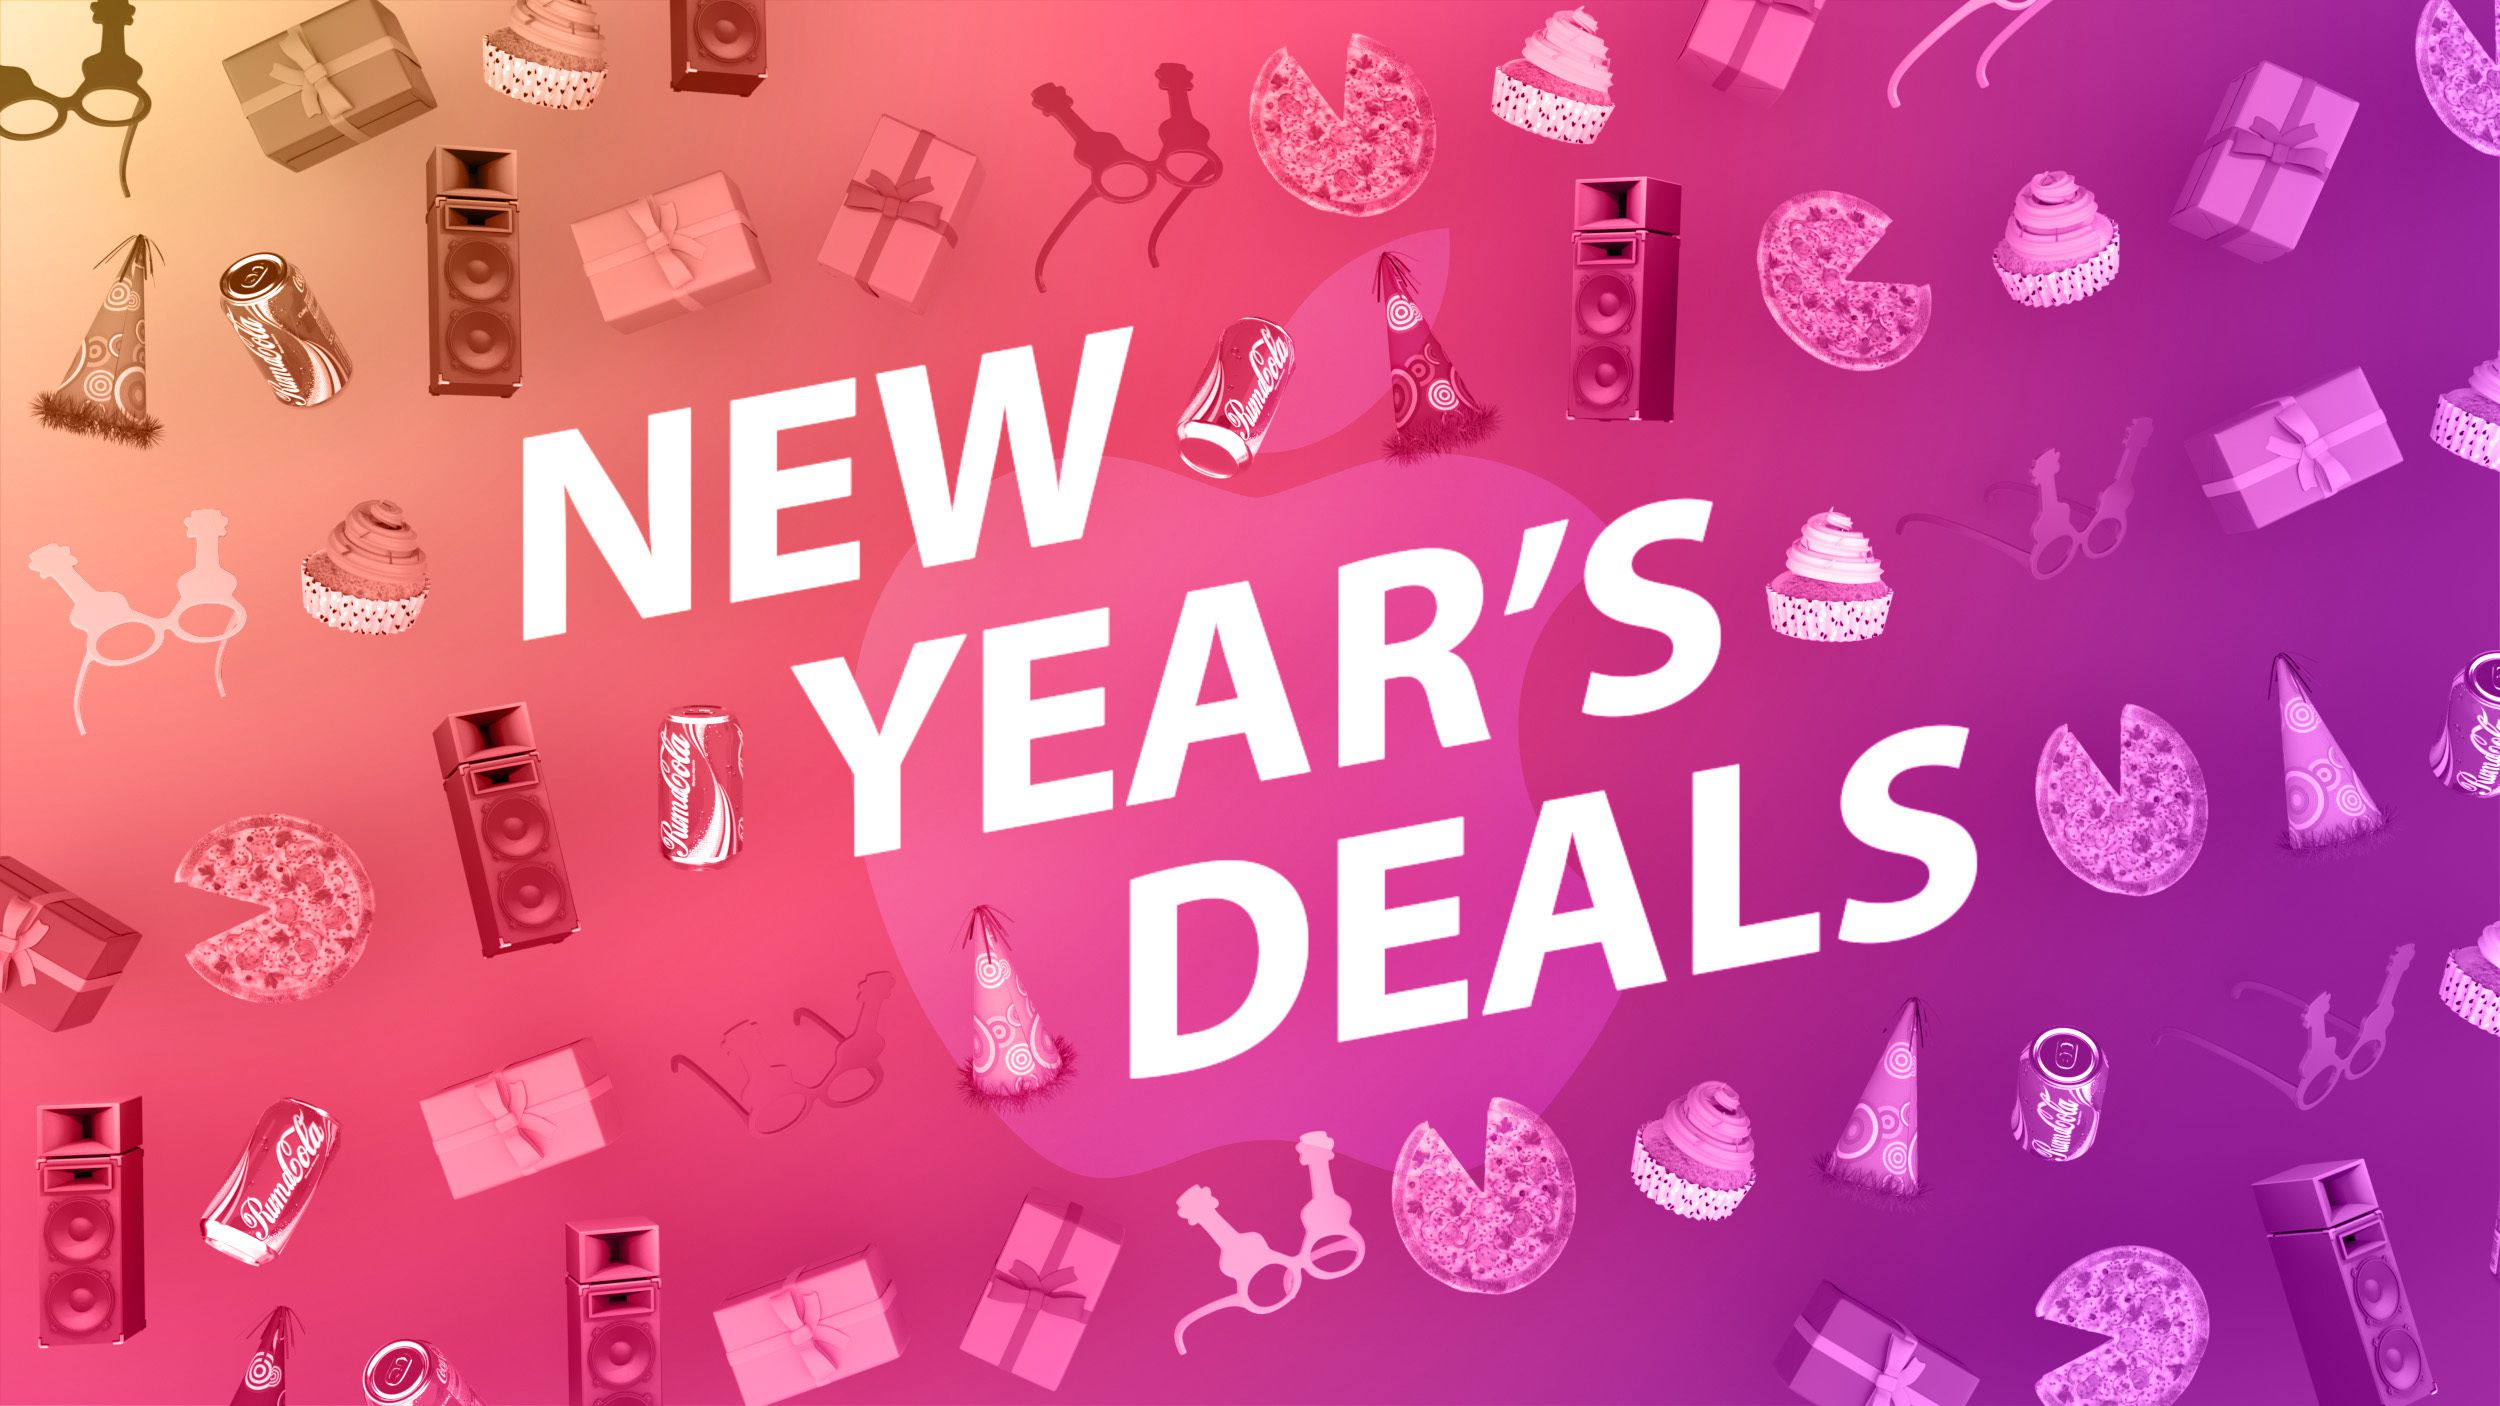 New Year Offers: Buy the best end-of-year discounts on Apple accessories from Twelve South, Mophie, Nomad and more